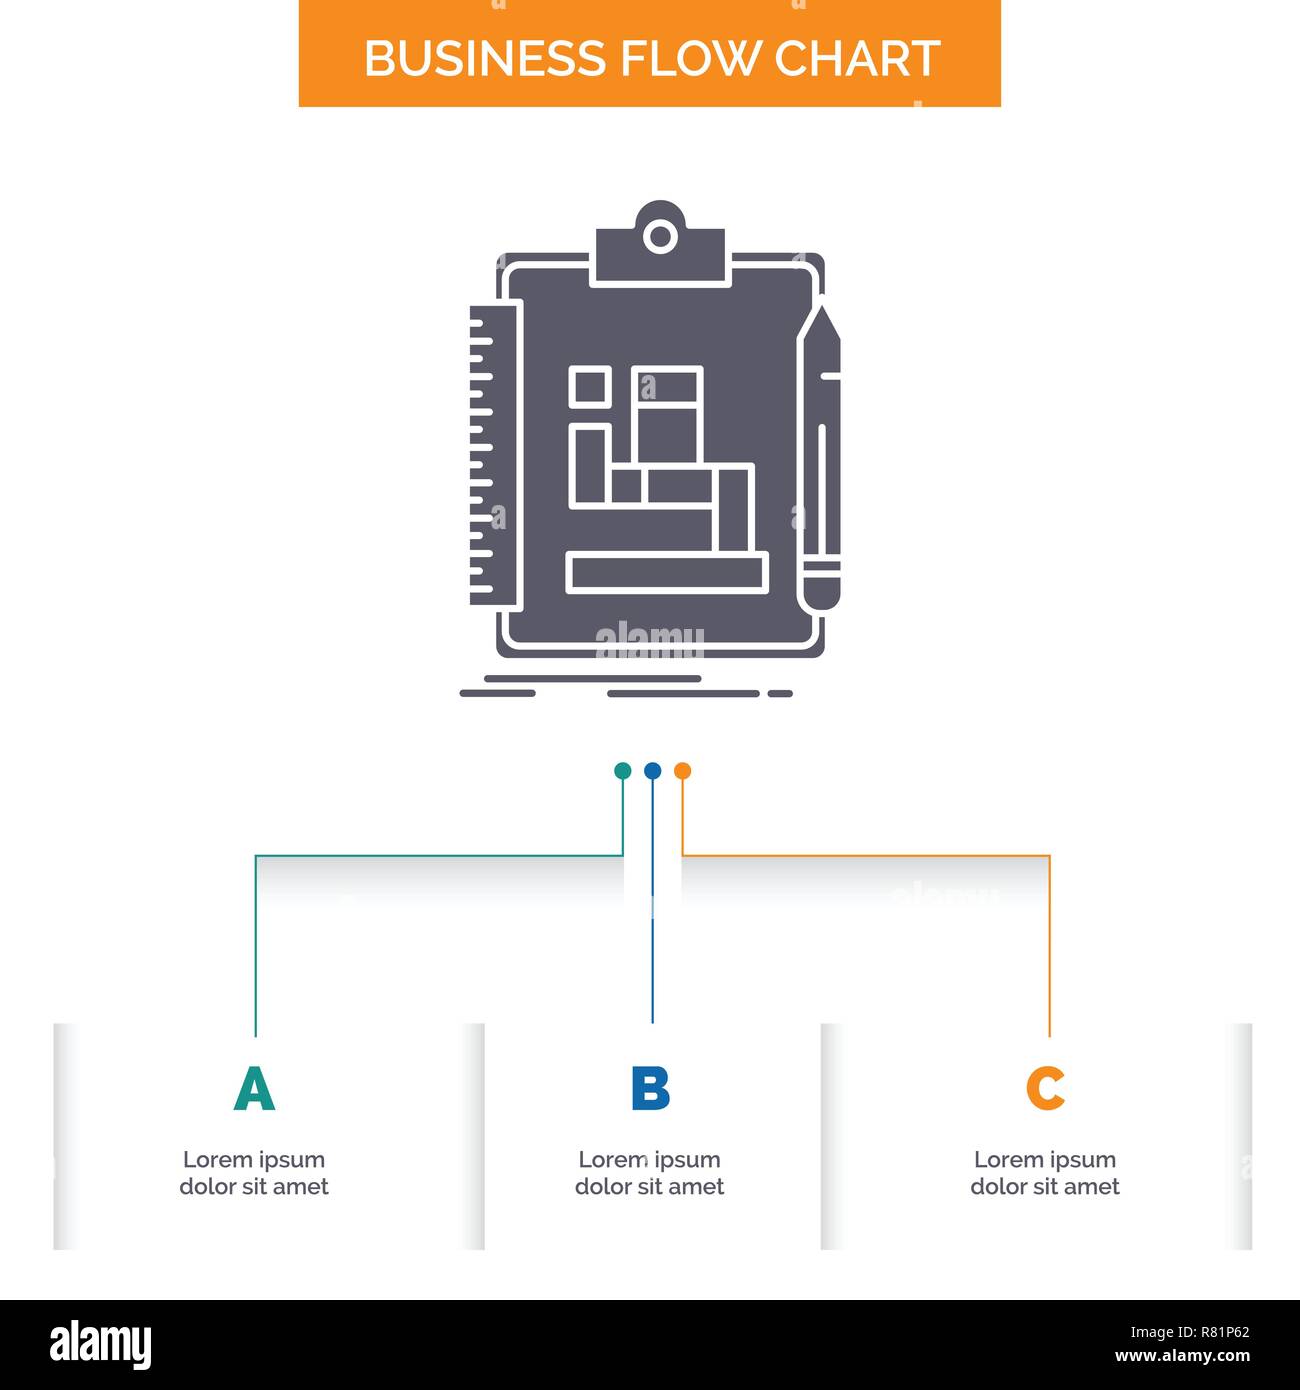 Work Process Flow Chart Template from c8.alamy.com